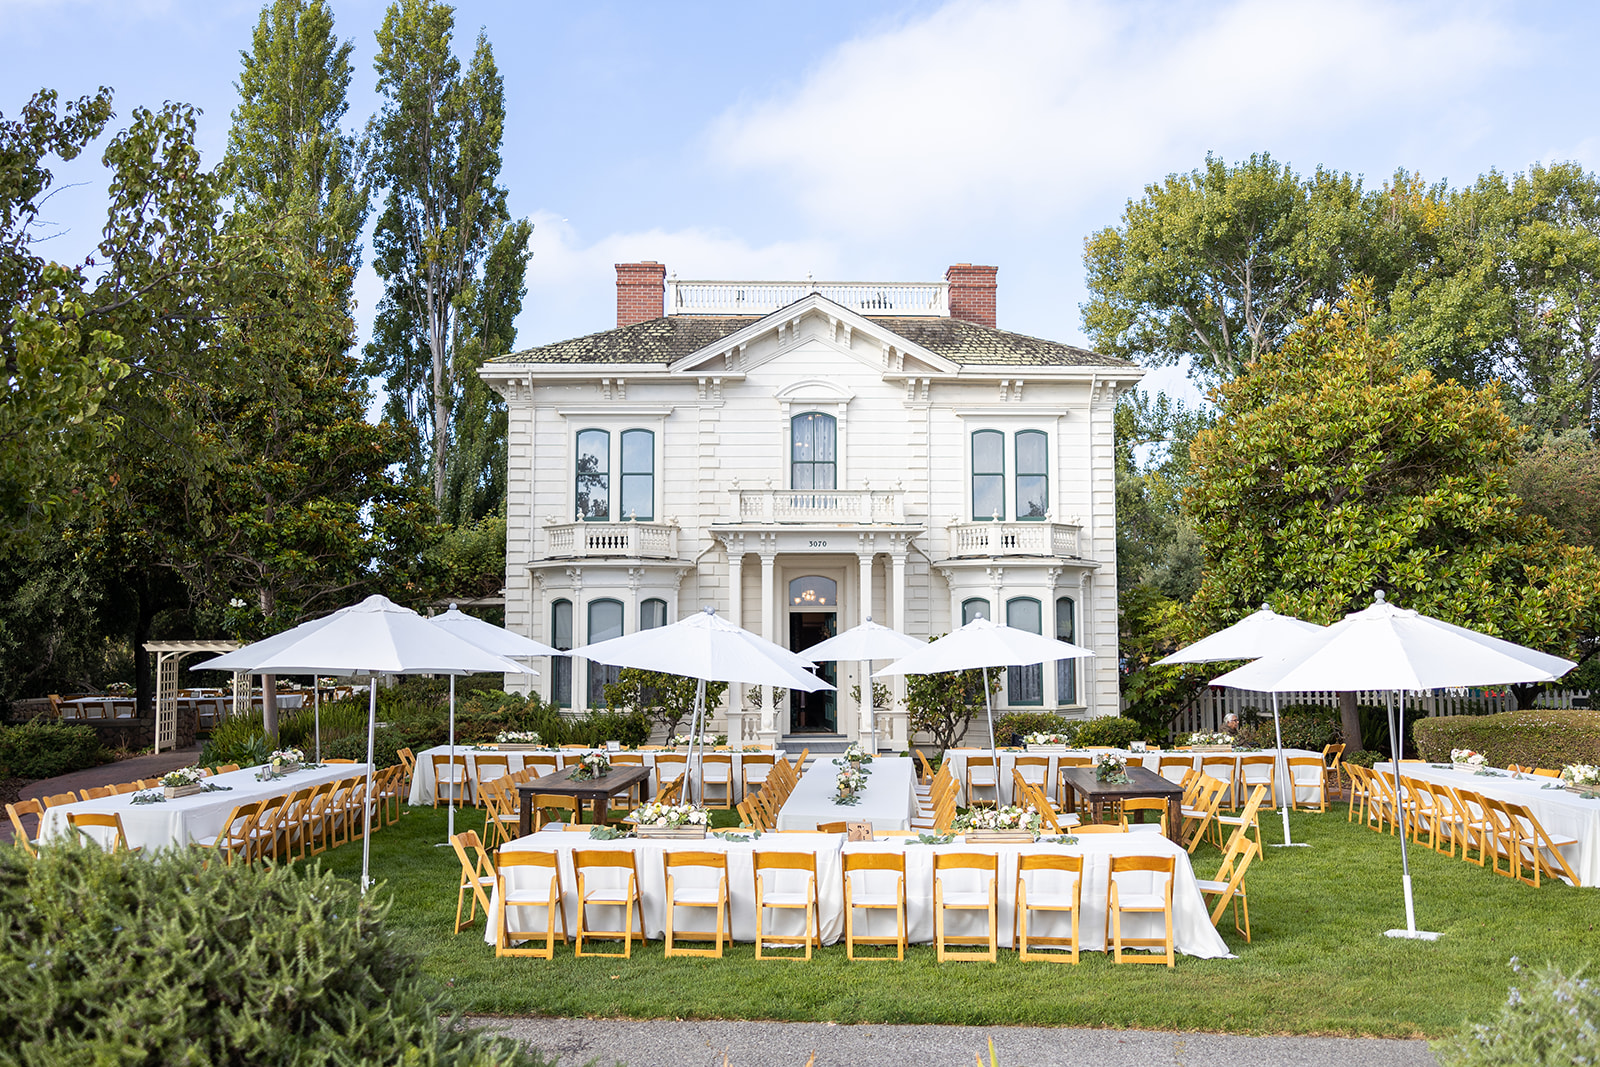 Rengstorff House in Mountain view set up for a wedding, a wonderful choice for Bay Area Indian Wedding Venues.